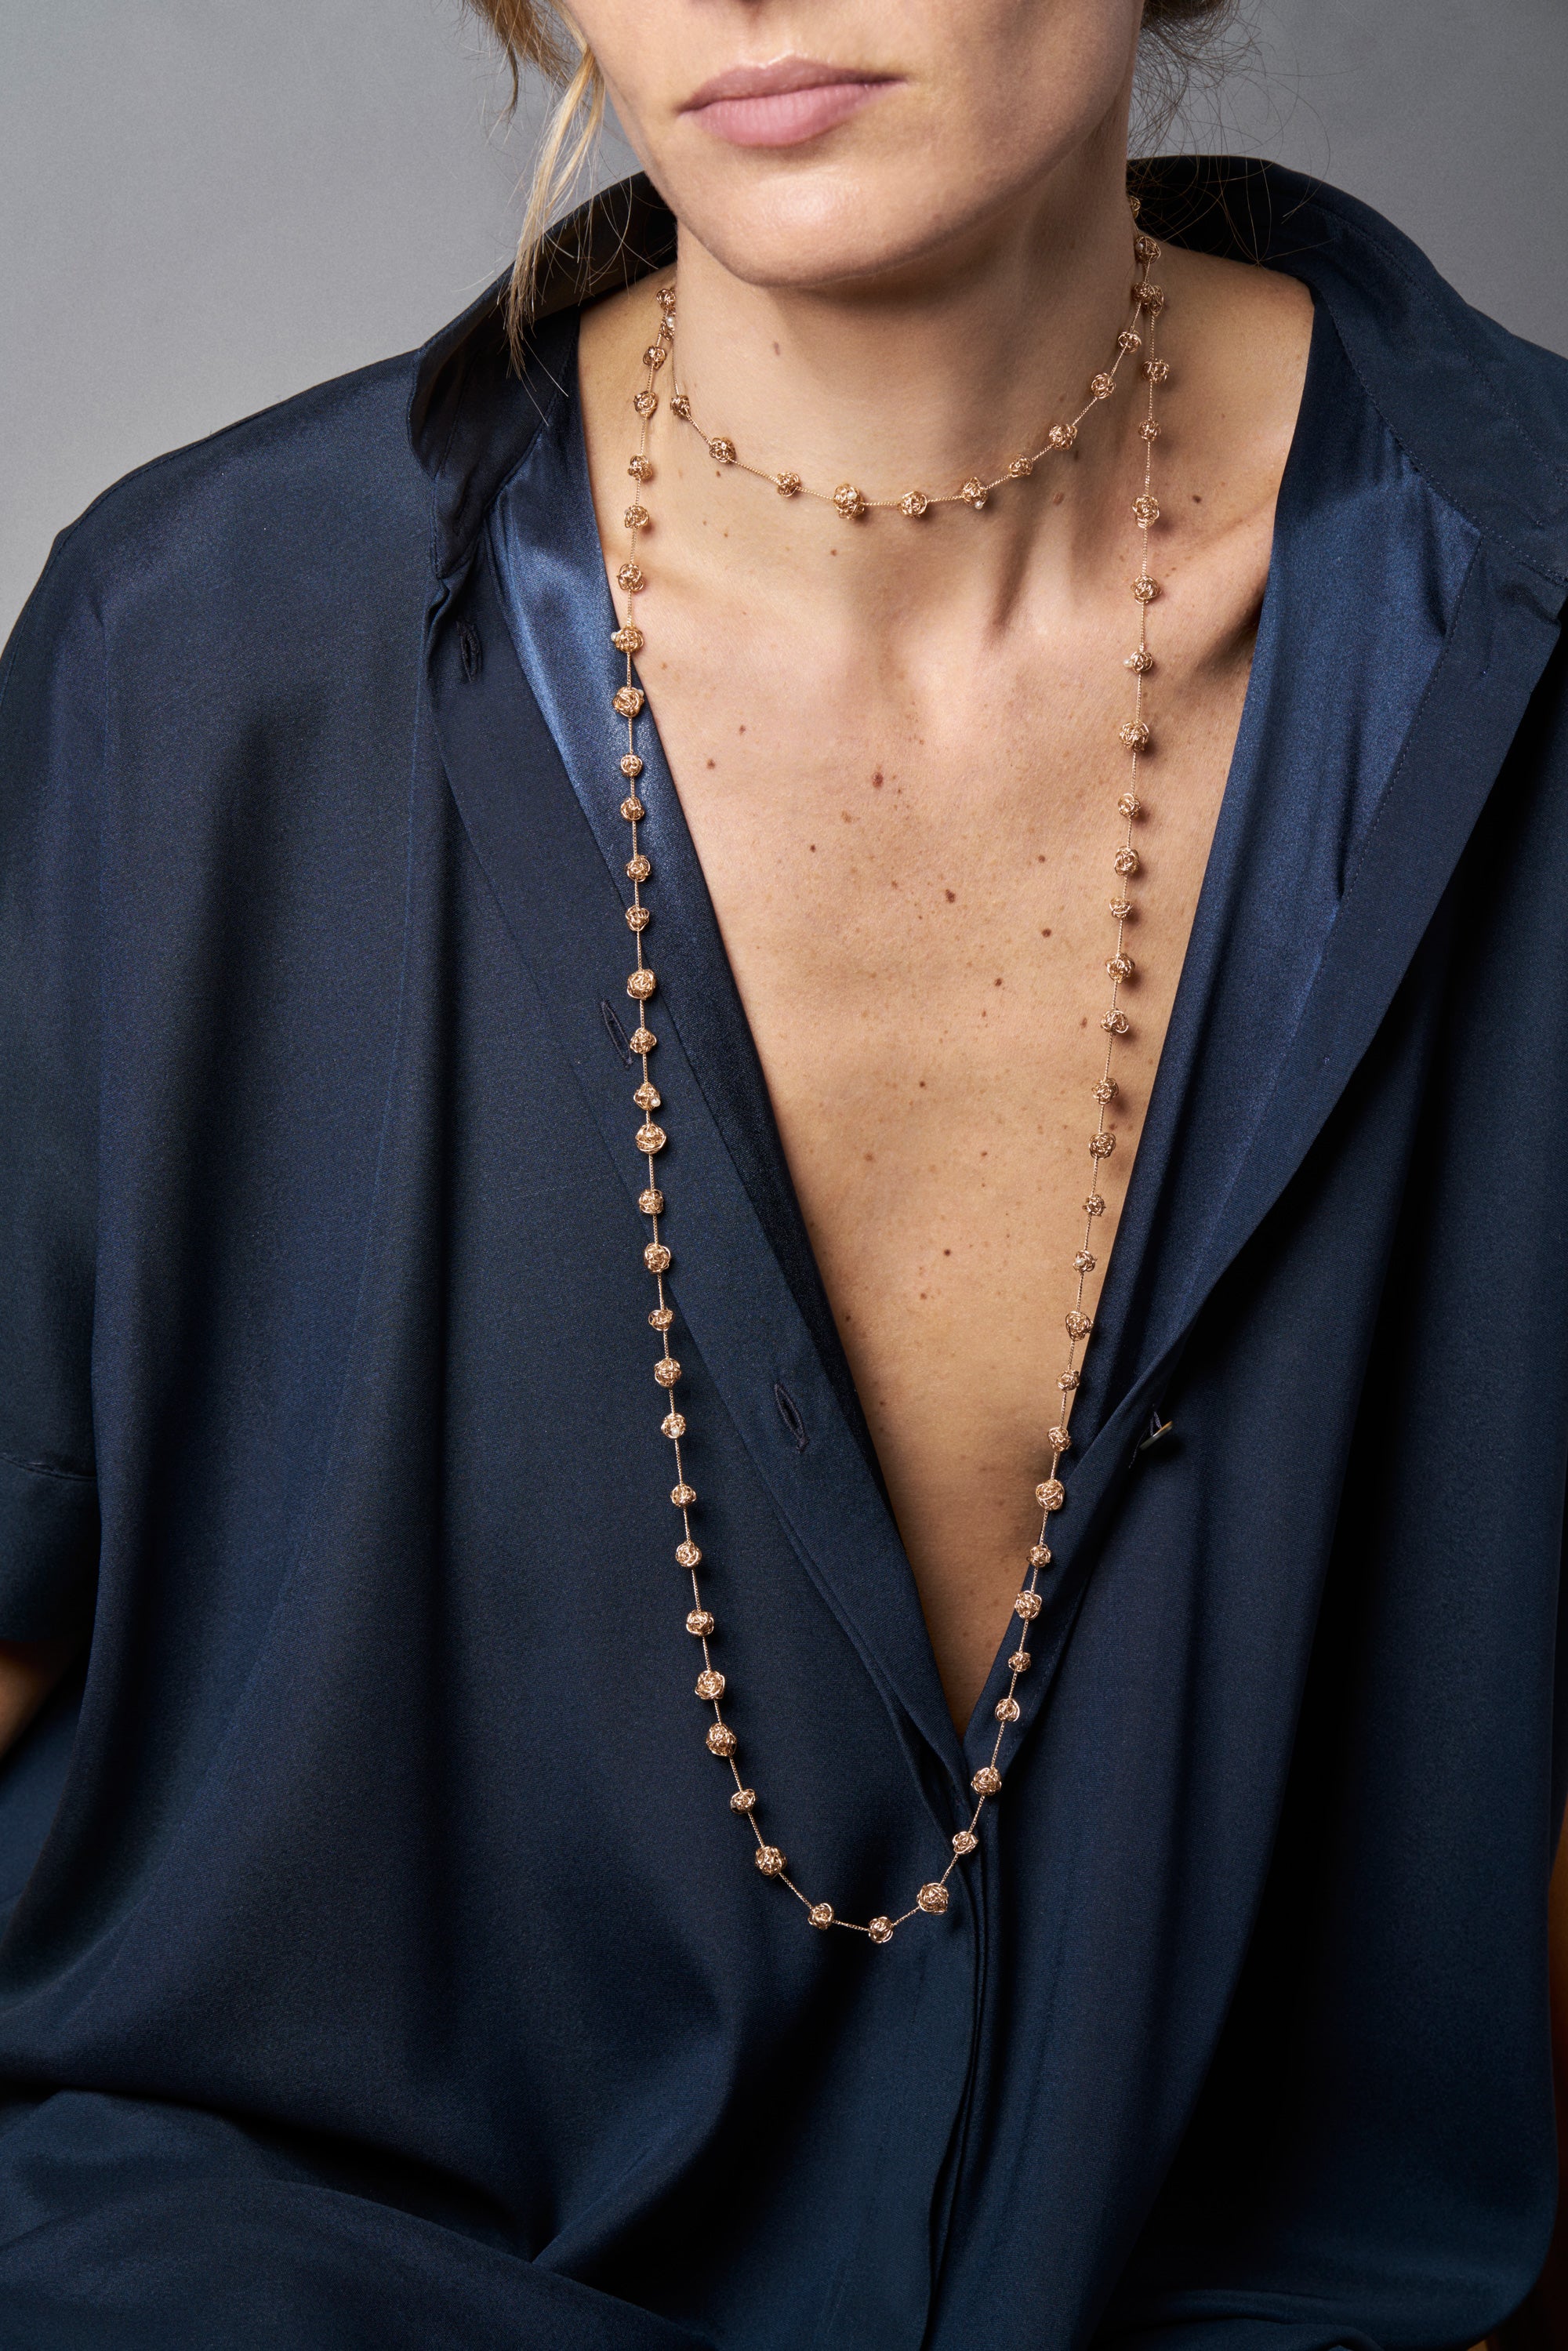 18KT Yellow Long Gold necklace with freshwater pearls, length 110 cm, worn by a female neck - Gomitoli